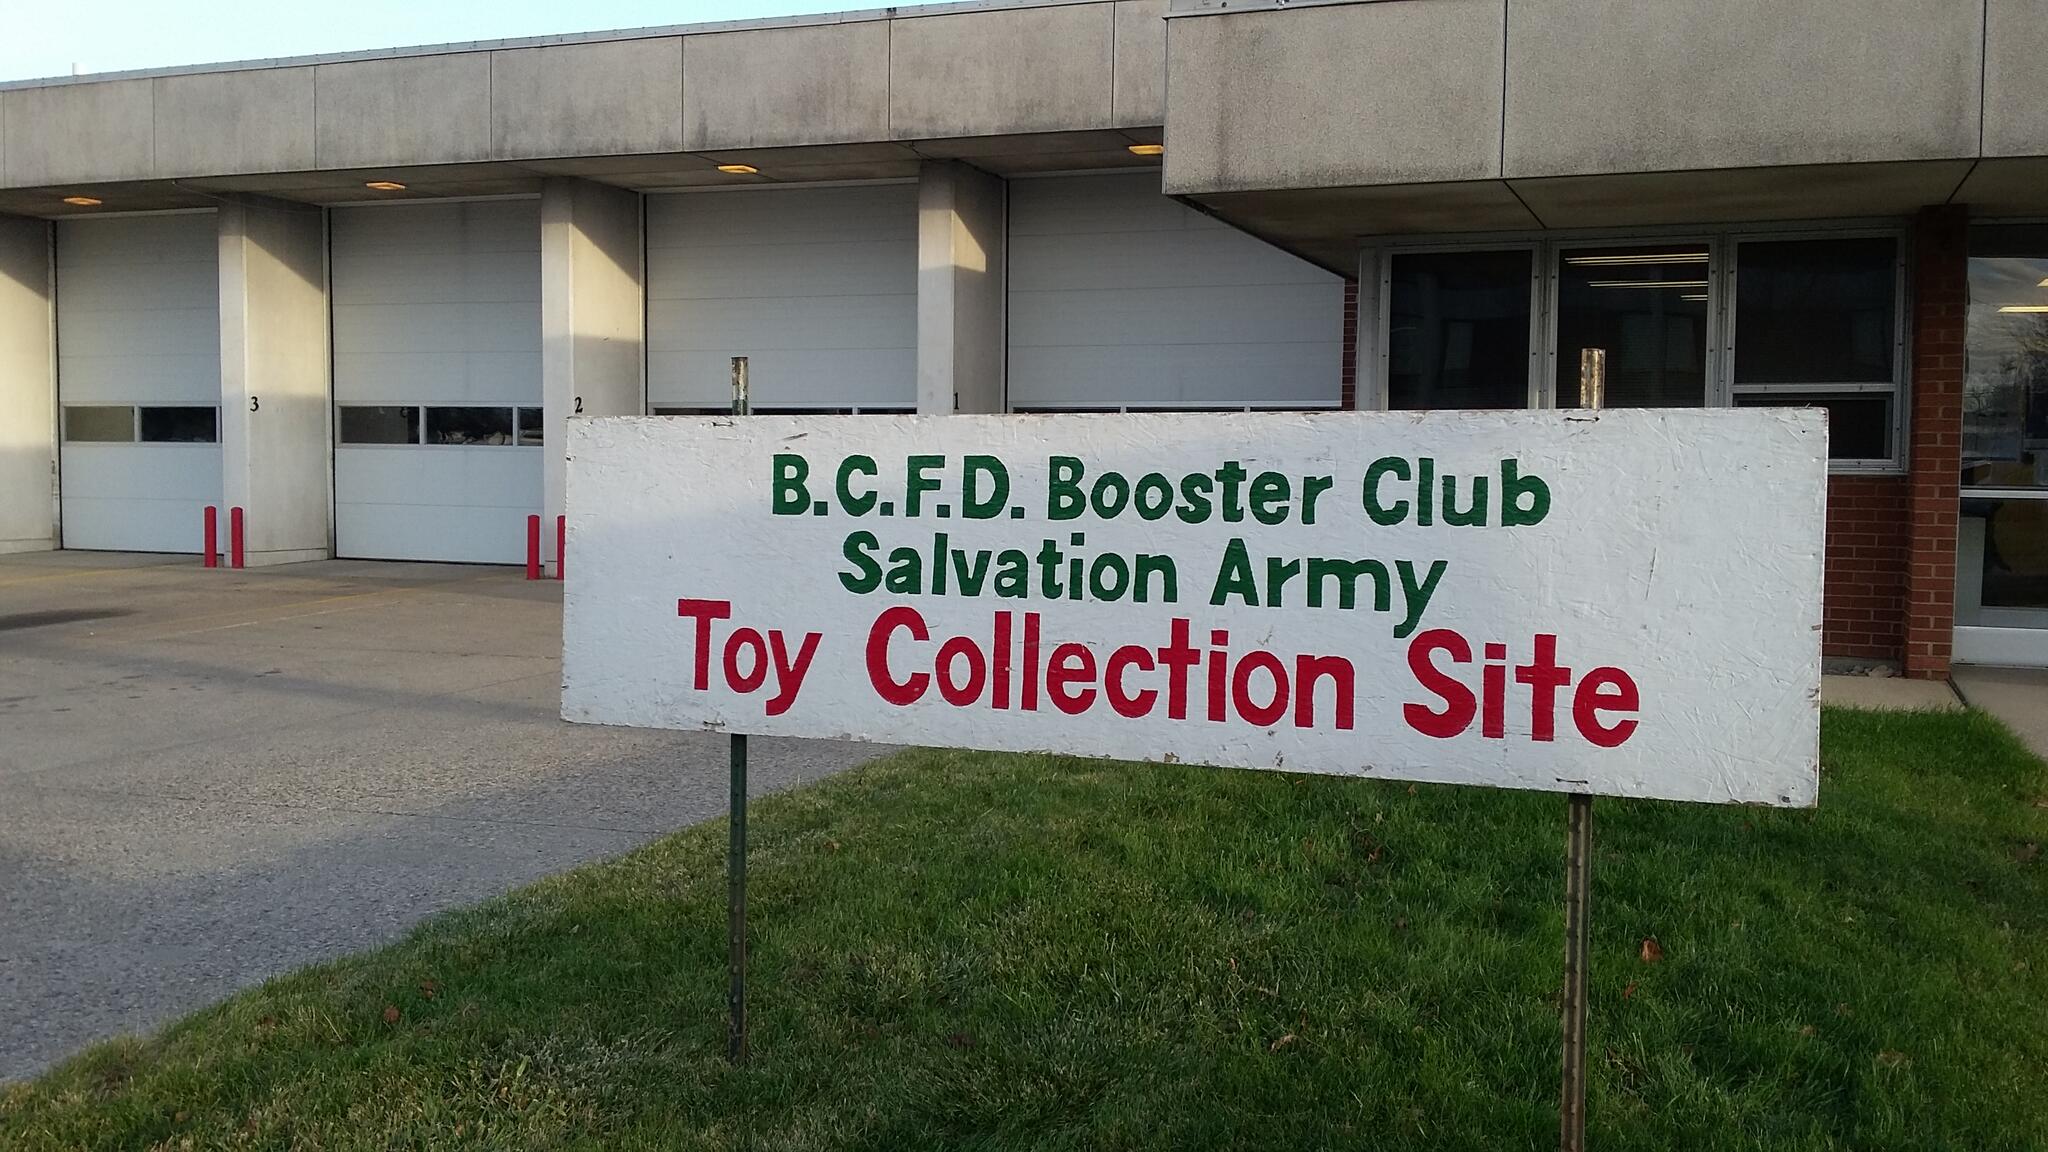 Fire Department collects toys for Salvation Army (City of Battle Creek